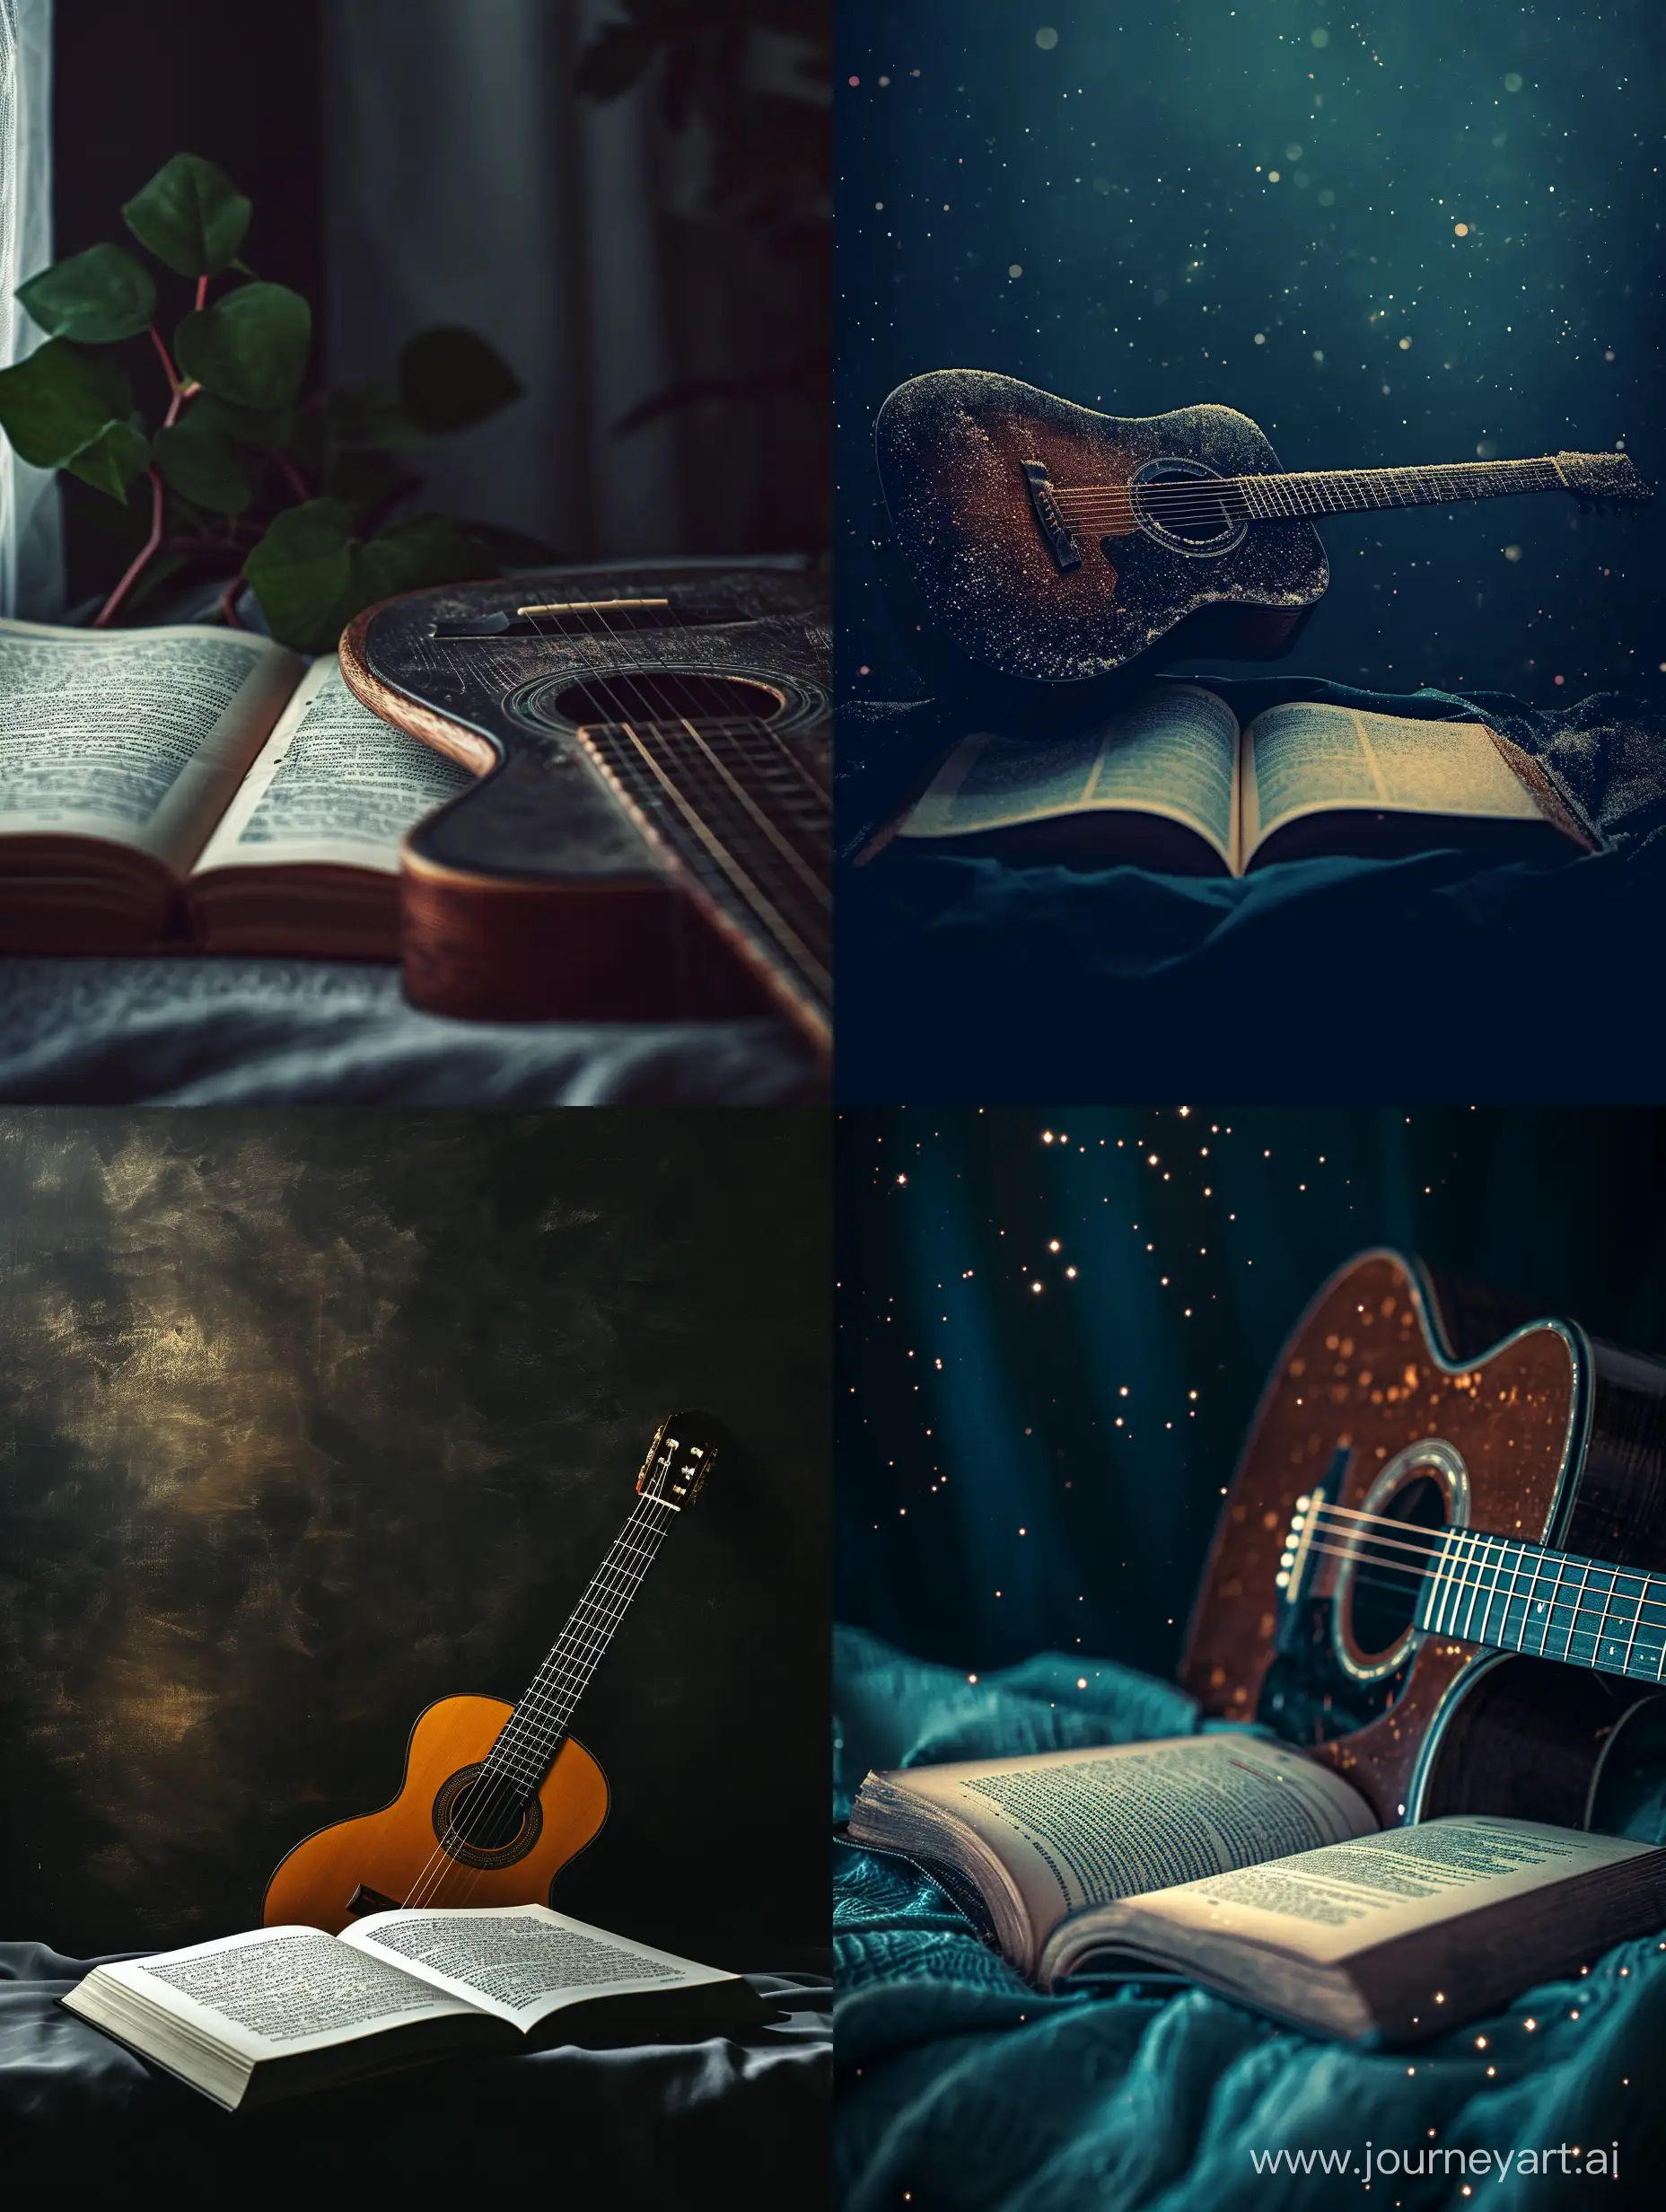 Learning tricks and secrets of acoustic guitar, scientific cover book style, realist image, dark colors